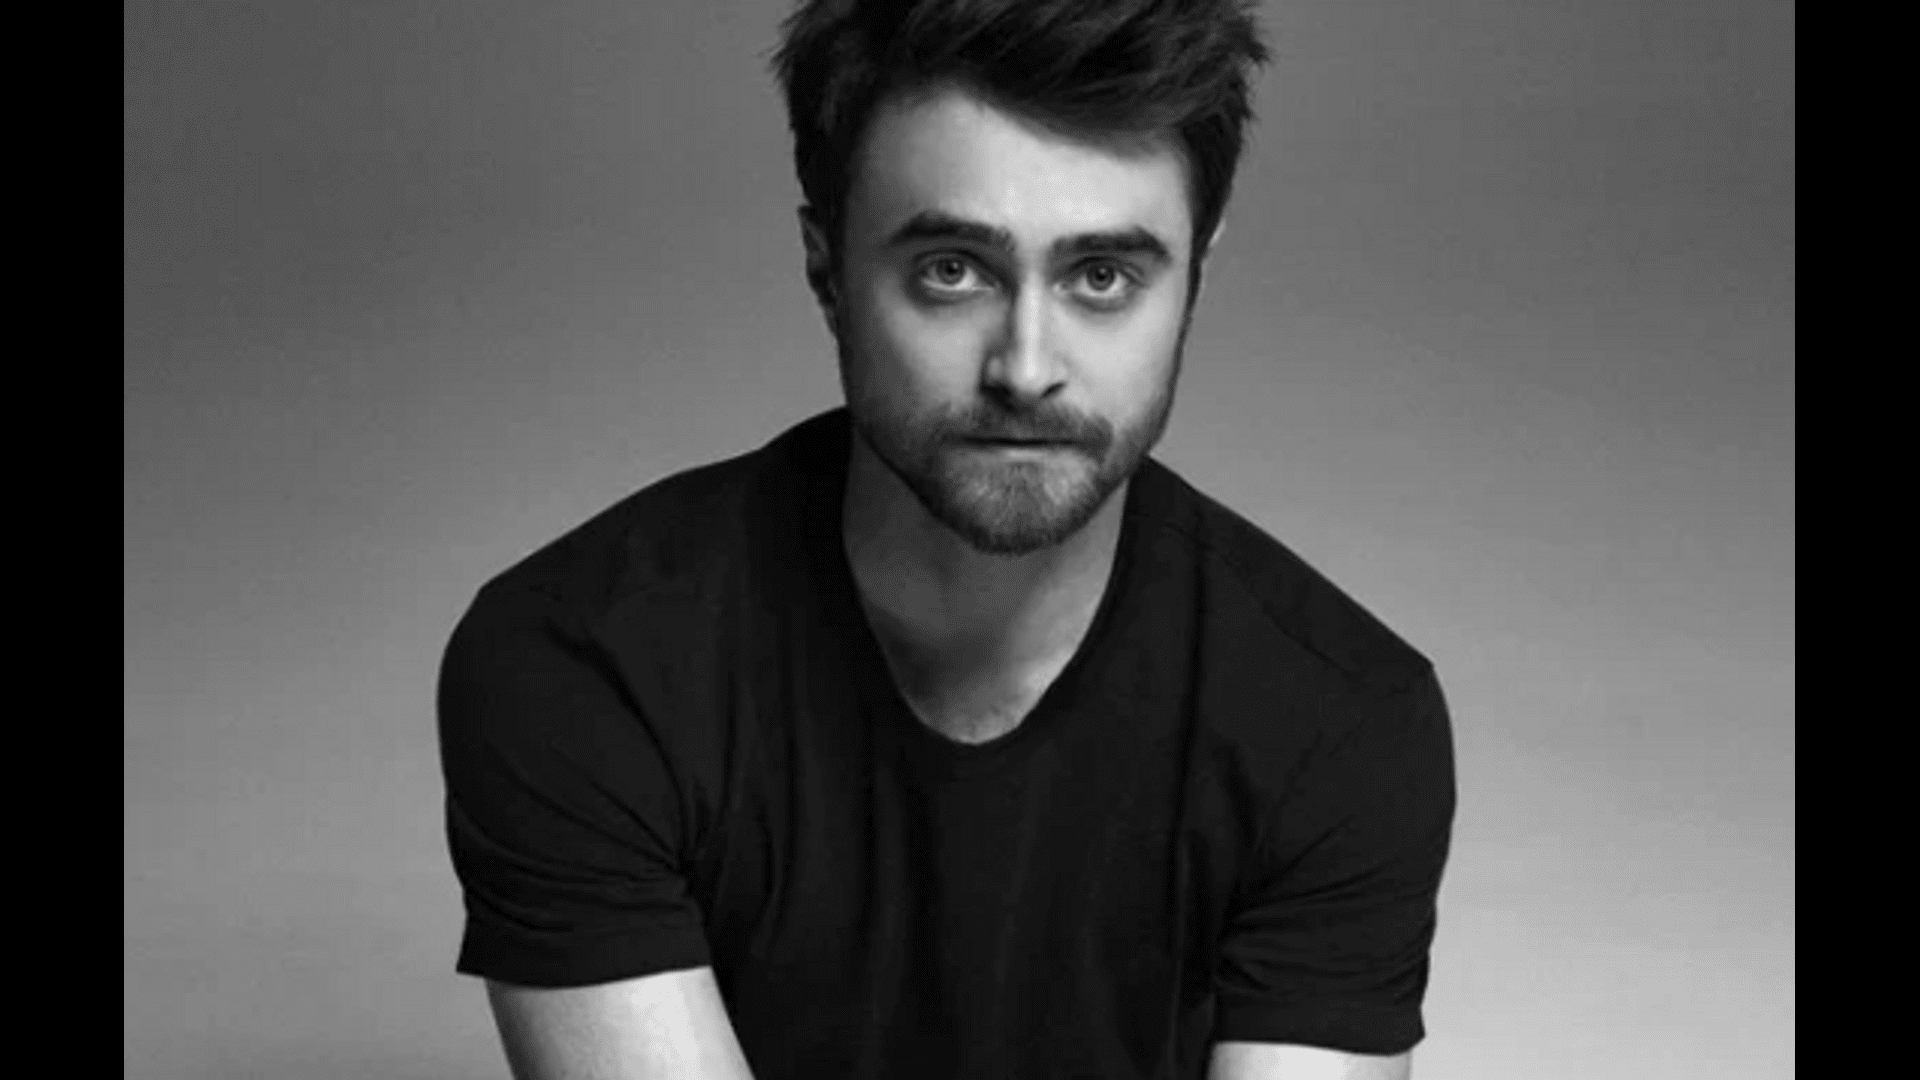 ”daniel-radcliffe-is-not-interested-in-playing-harry-potter-again-in-the-cursed-child”